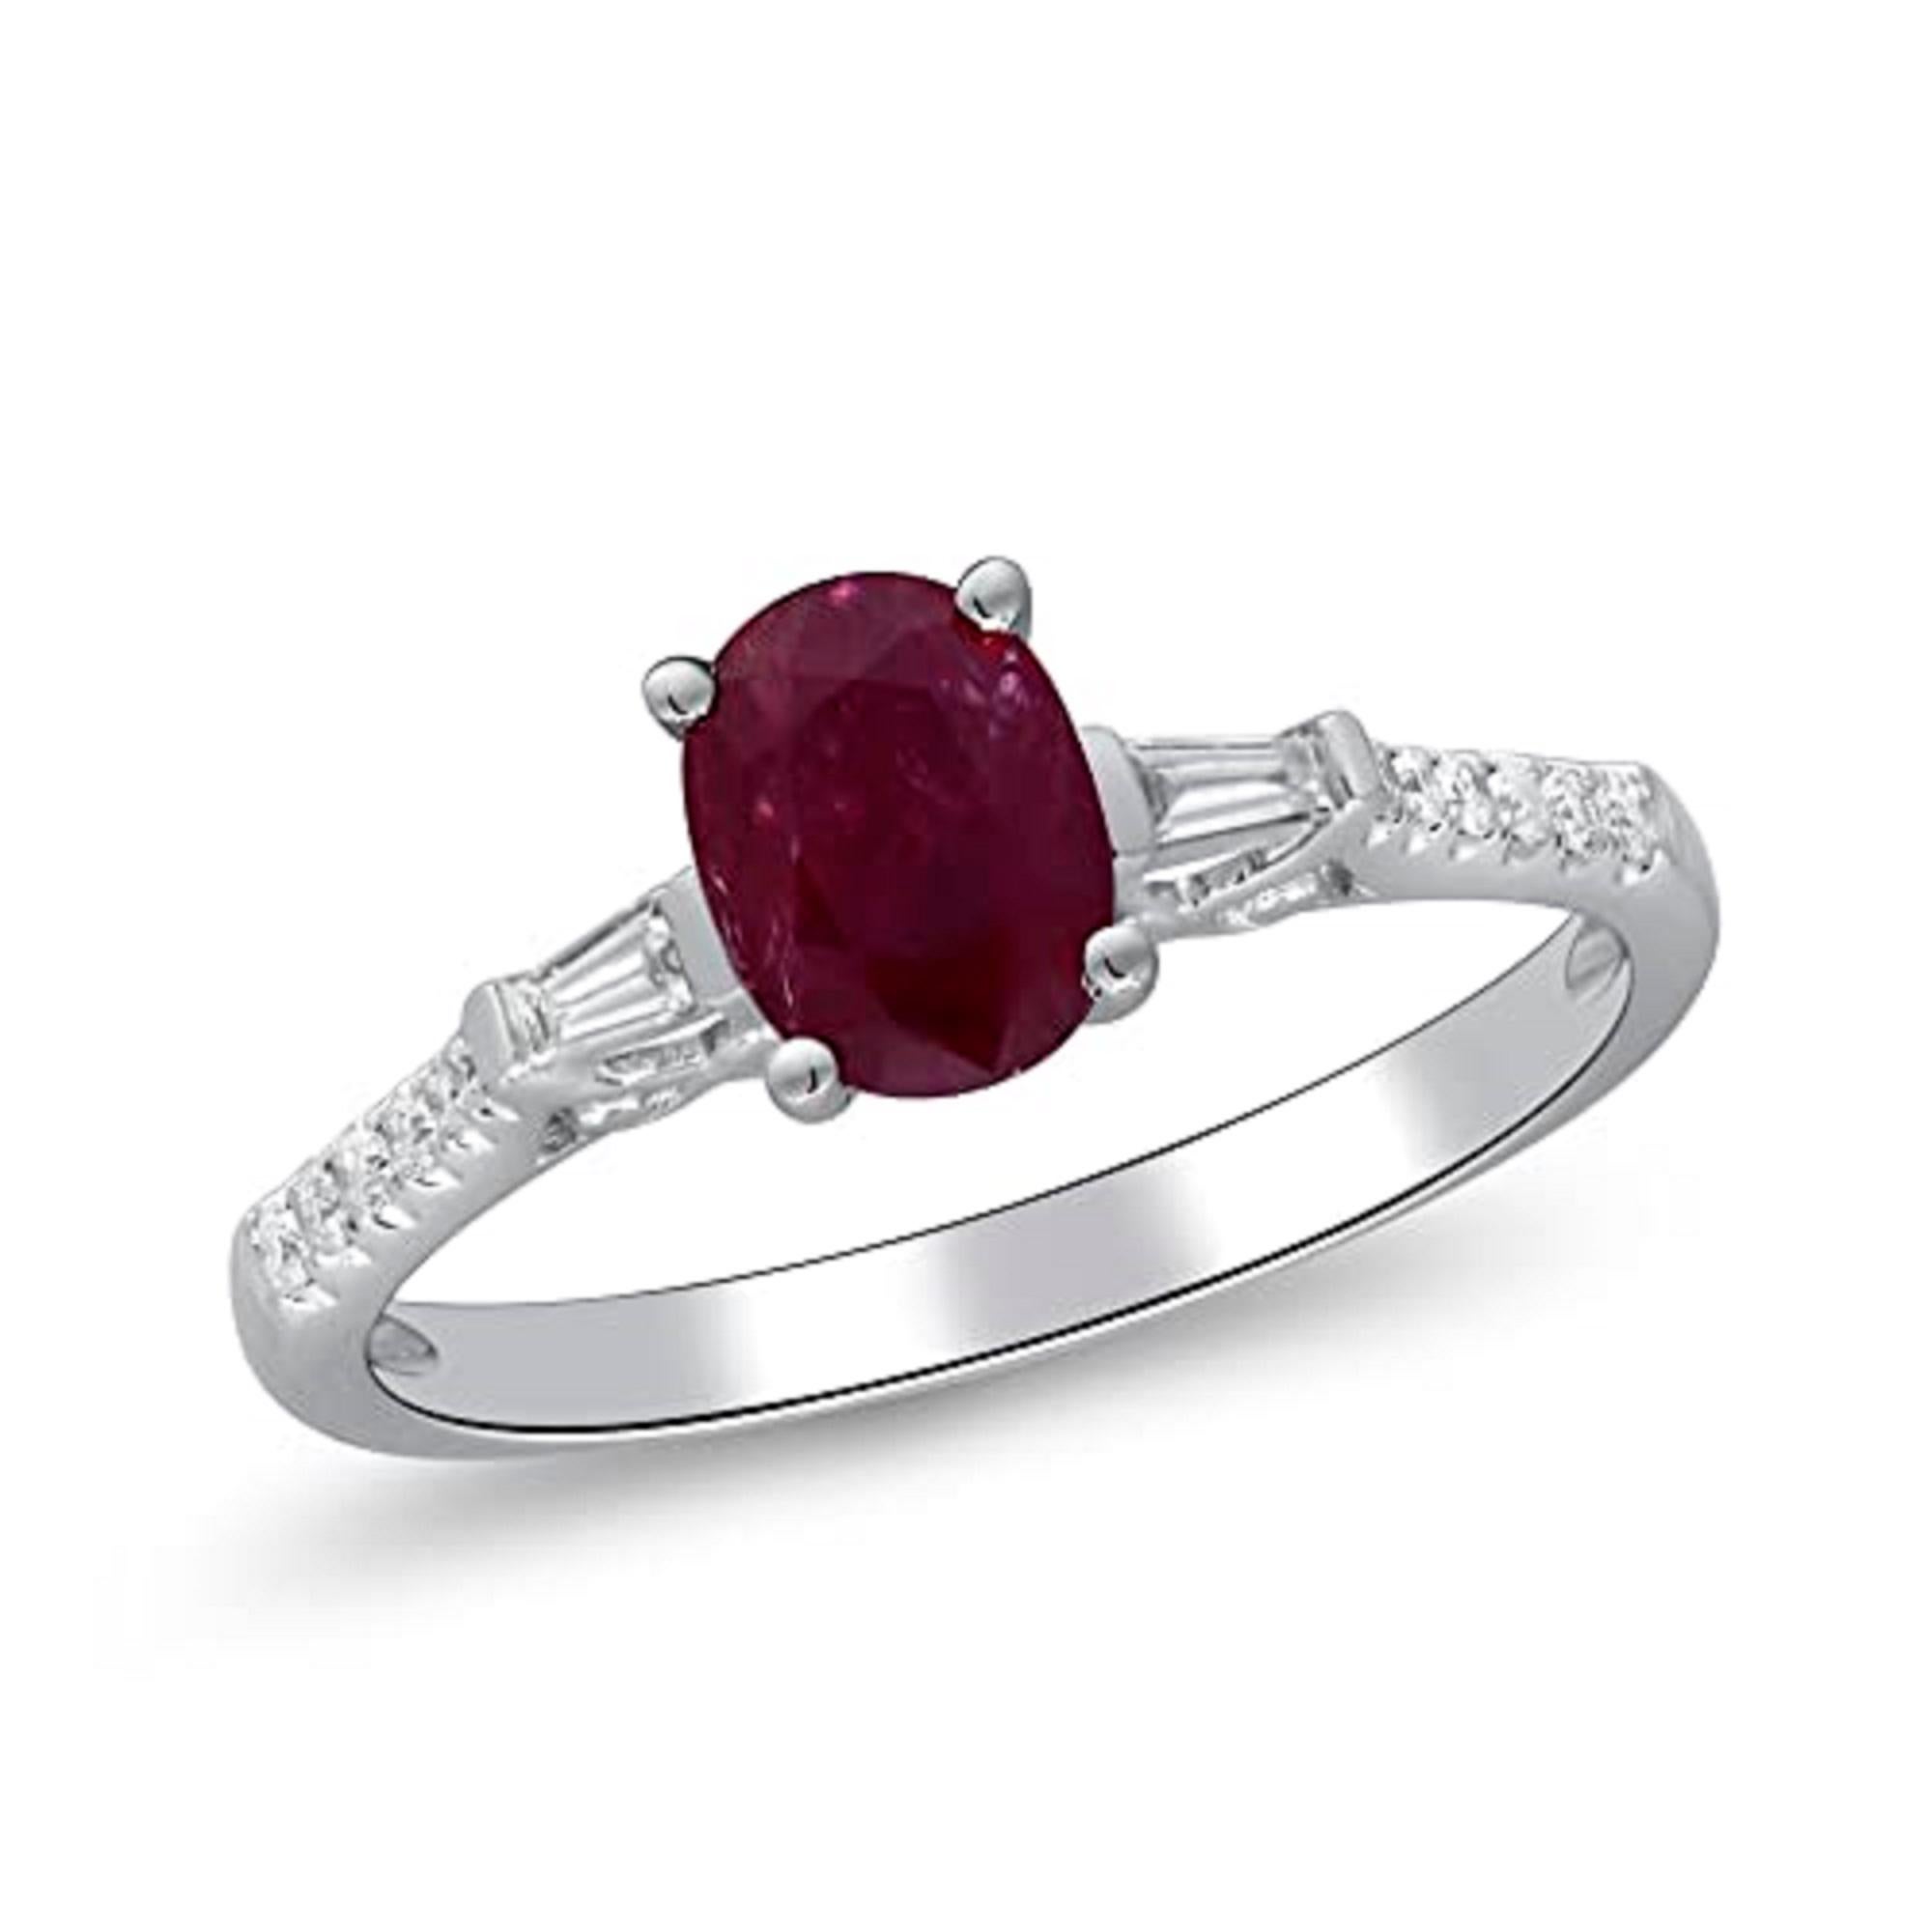 Decorate yourself in elegance with this Ring is crafted from 14-karat White Gold by Gin & Grace. This Ring is made up of 7x5 mm Oval-Cut Ruby (1 pcs) 0.97 carat and Round-cut White Diamond (14 Pcs) 0.10 Carat, Baguette-cut White Diamond (2 pcs) 0.08